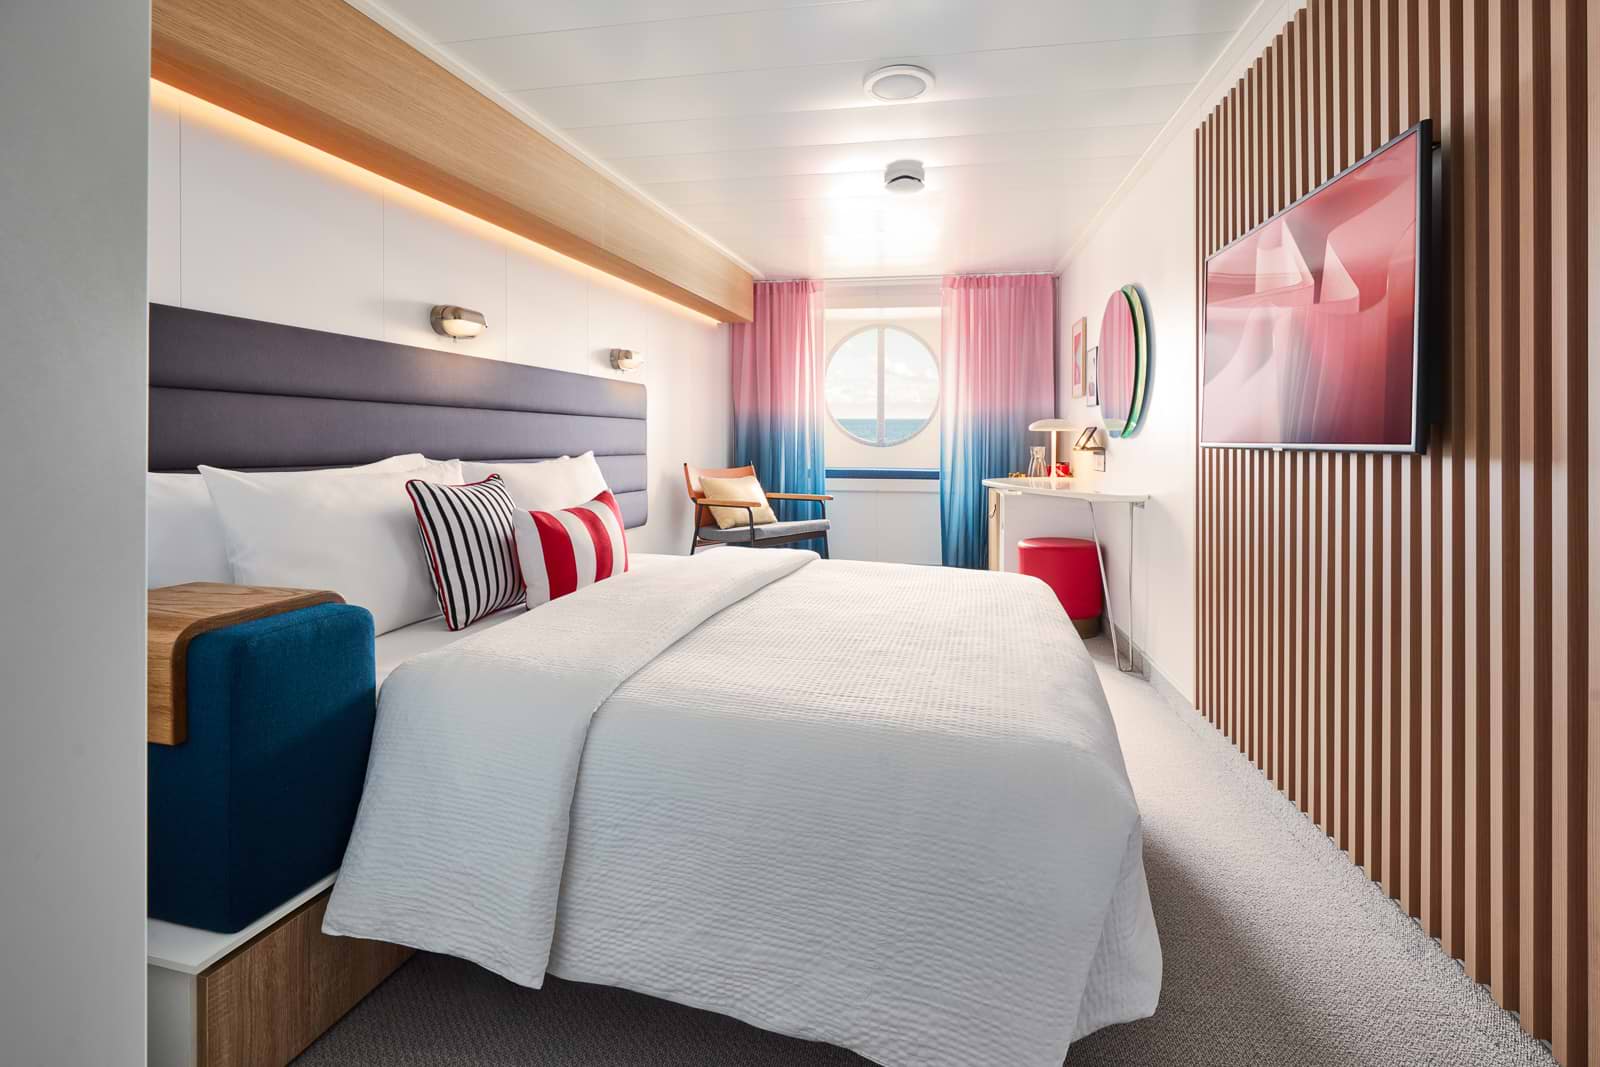 With an innovative seabed, mood lighting, and large porthole window, go from chic to (very) deep sleep all voyage long. 